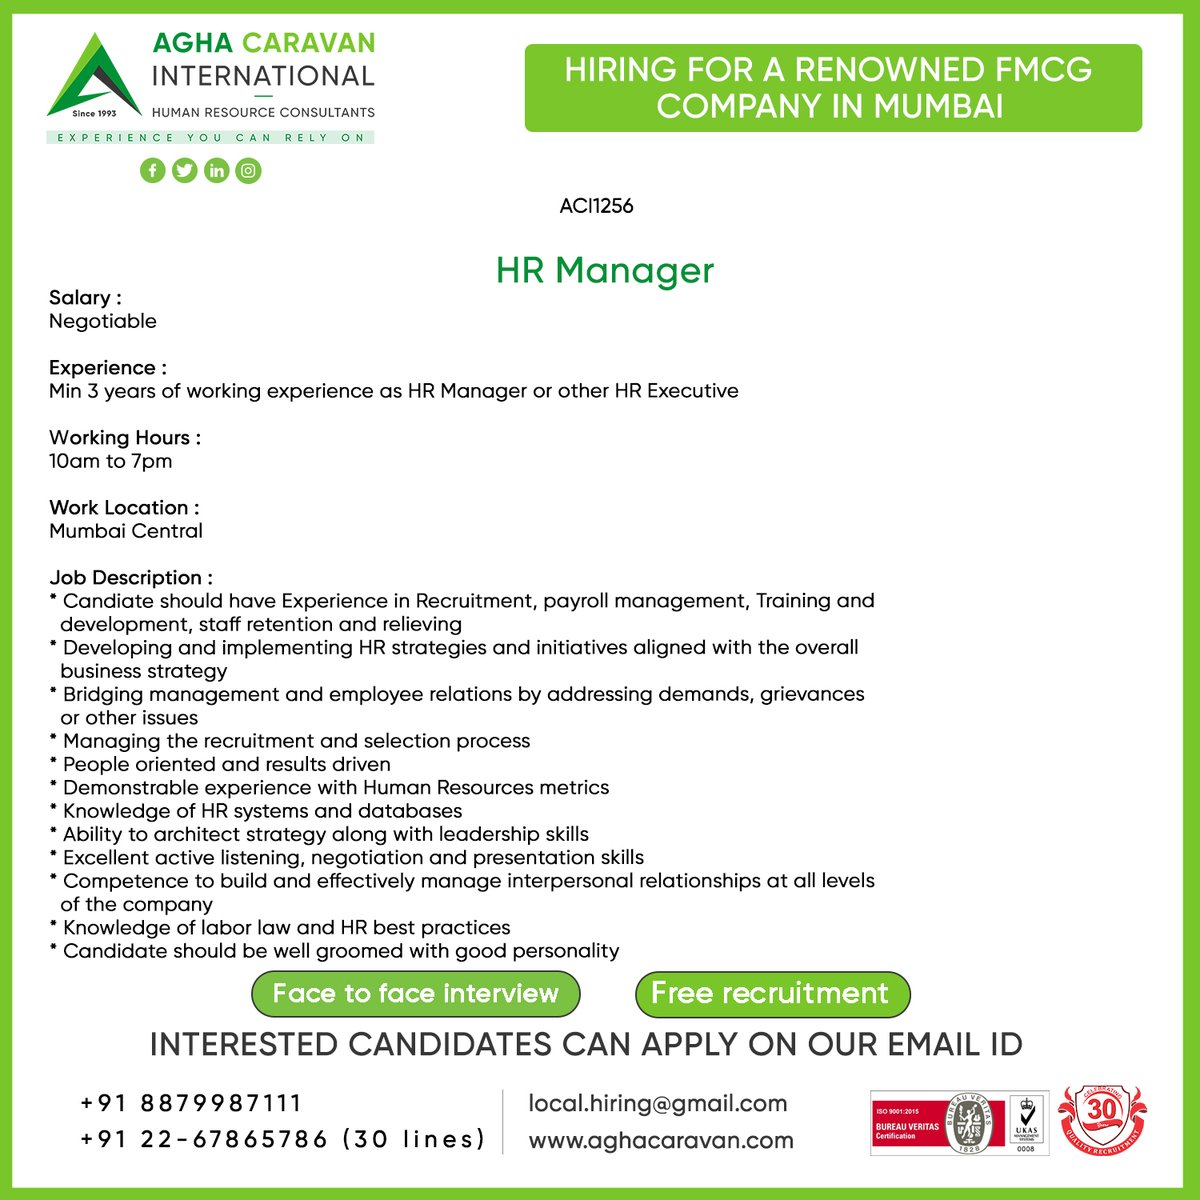 Greetings from Agha Caravan! Kindly apply on the given email with your updated CV and position in the subject line. 
Thank you. 
#acijobs #jobseekers #mumbaijobs #mumbai #hrmanager #hrexecutive #urgenthiring #manager #applynow #jobvacancy #Jobopportunity